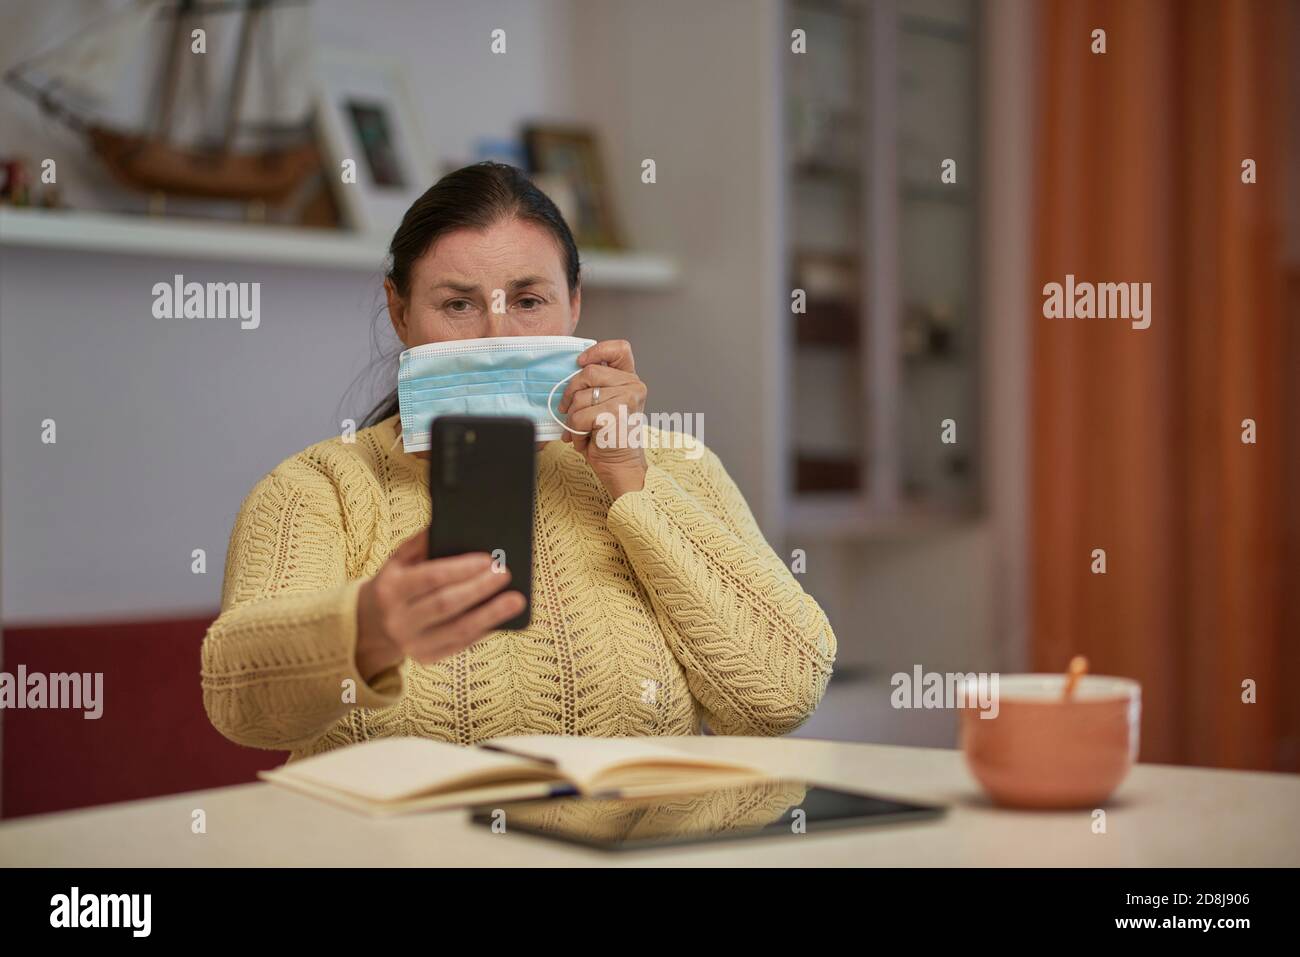 Senior woman in yellow sweater looking at smartphone with mask Stock Photo